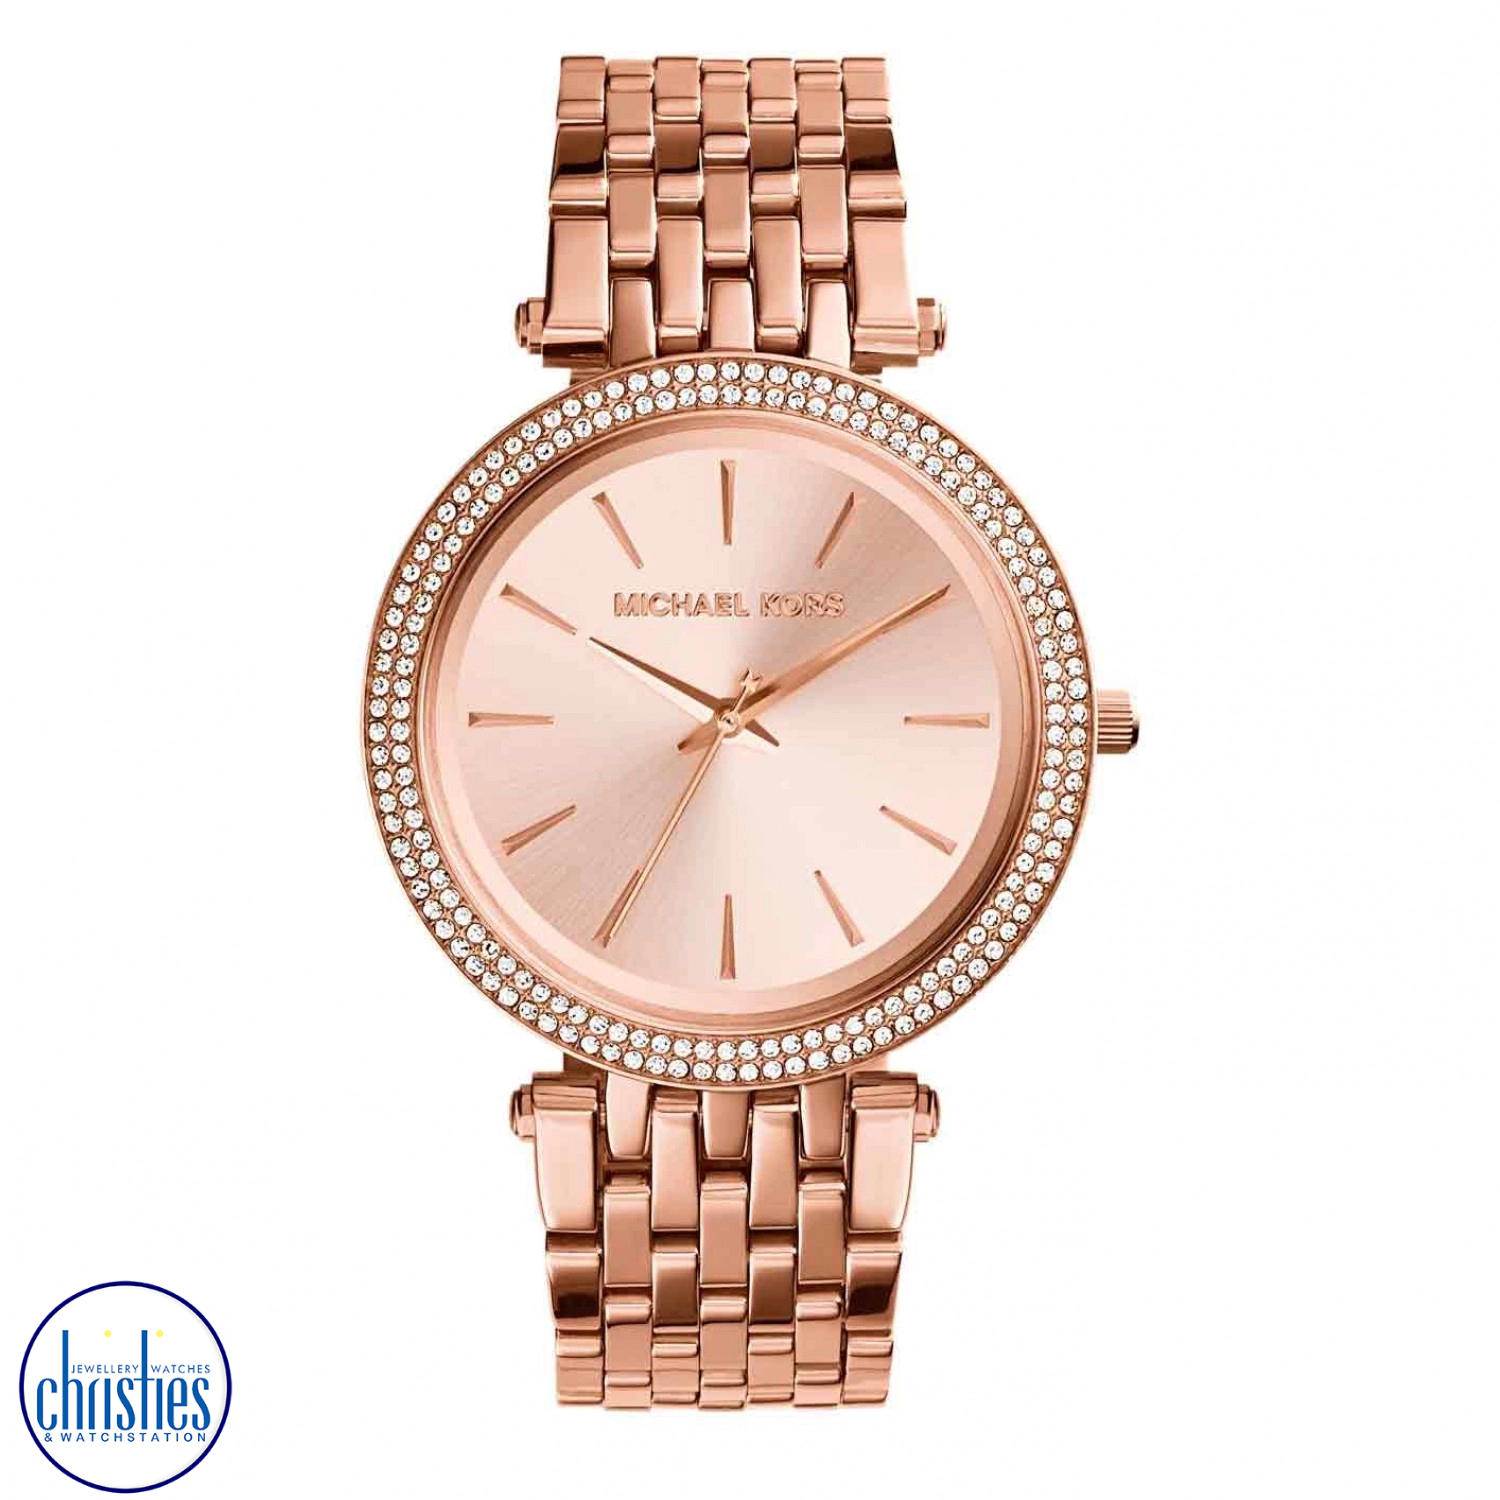 MK3192 Michael Kors Darci Pavé Rose Gold Tone Watch. A little glam, a little girl-next-door—Michael Kors Darci watch delivers standout style without going over the top. A pavé embellished bezel lends look-at-me flair, while the radiant rose gold tone brac